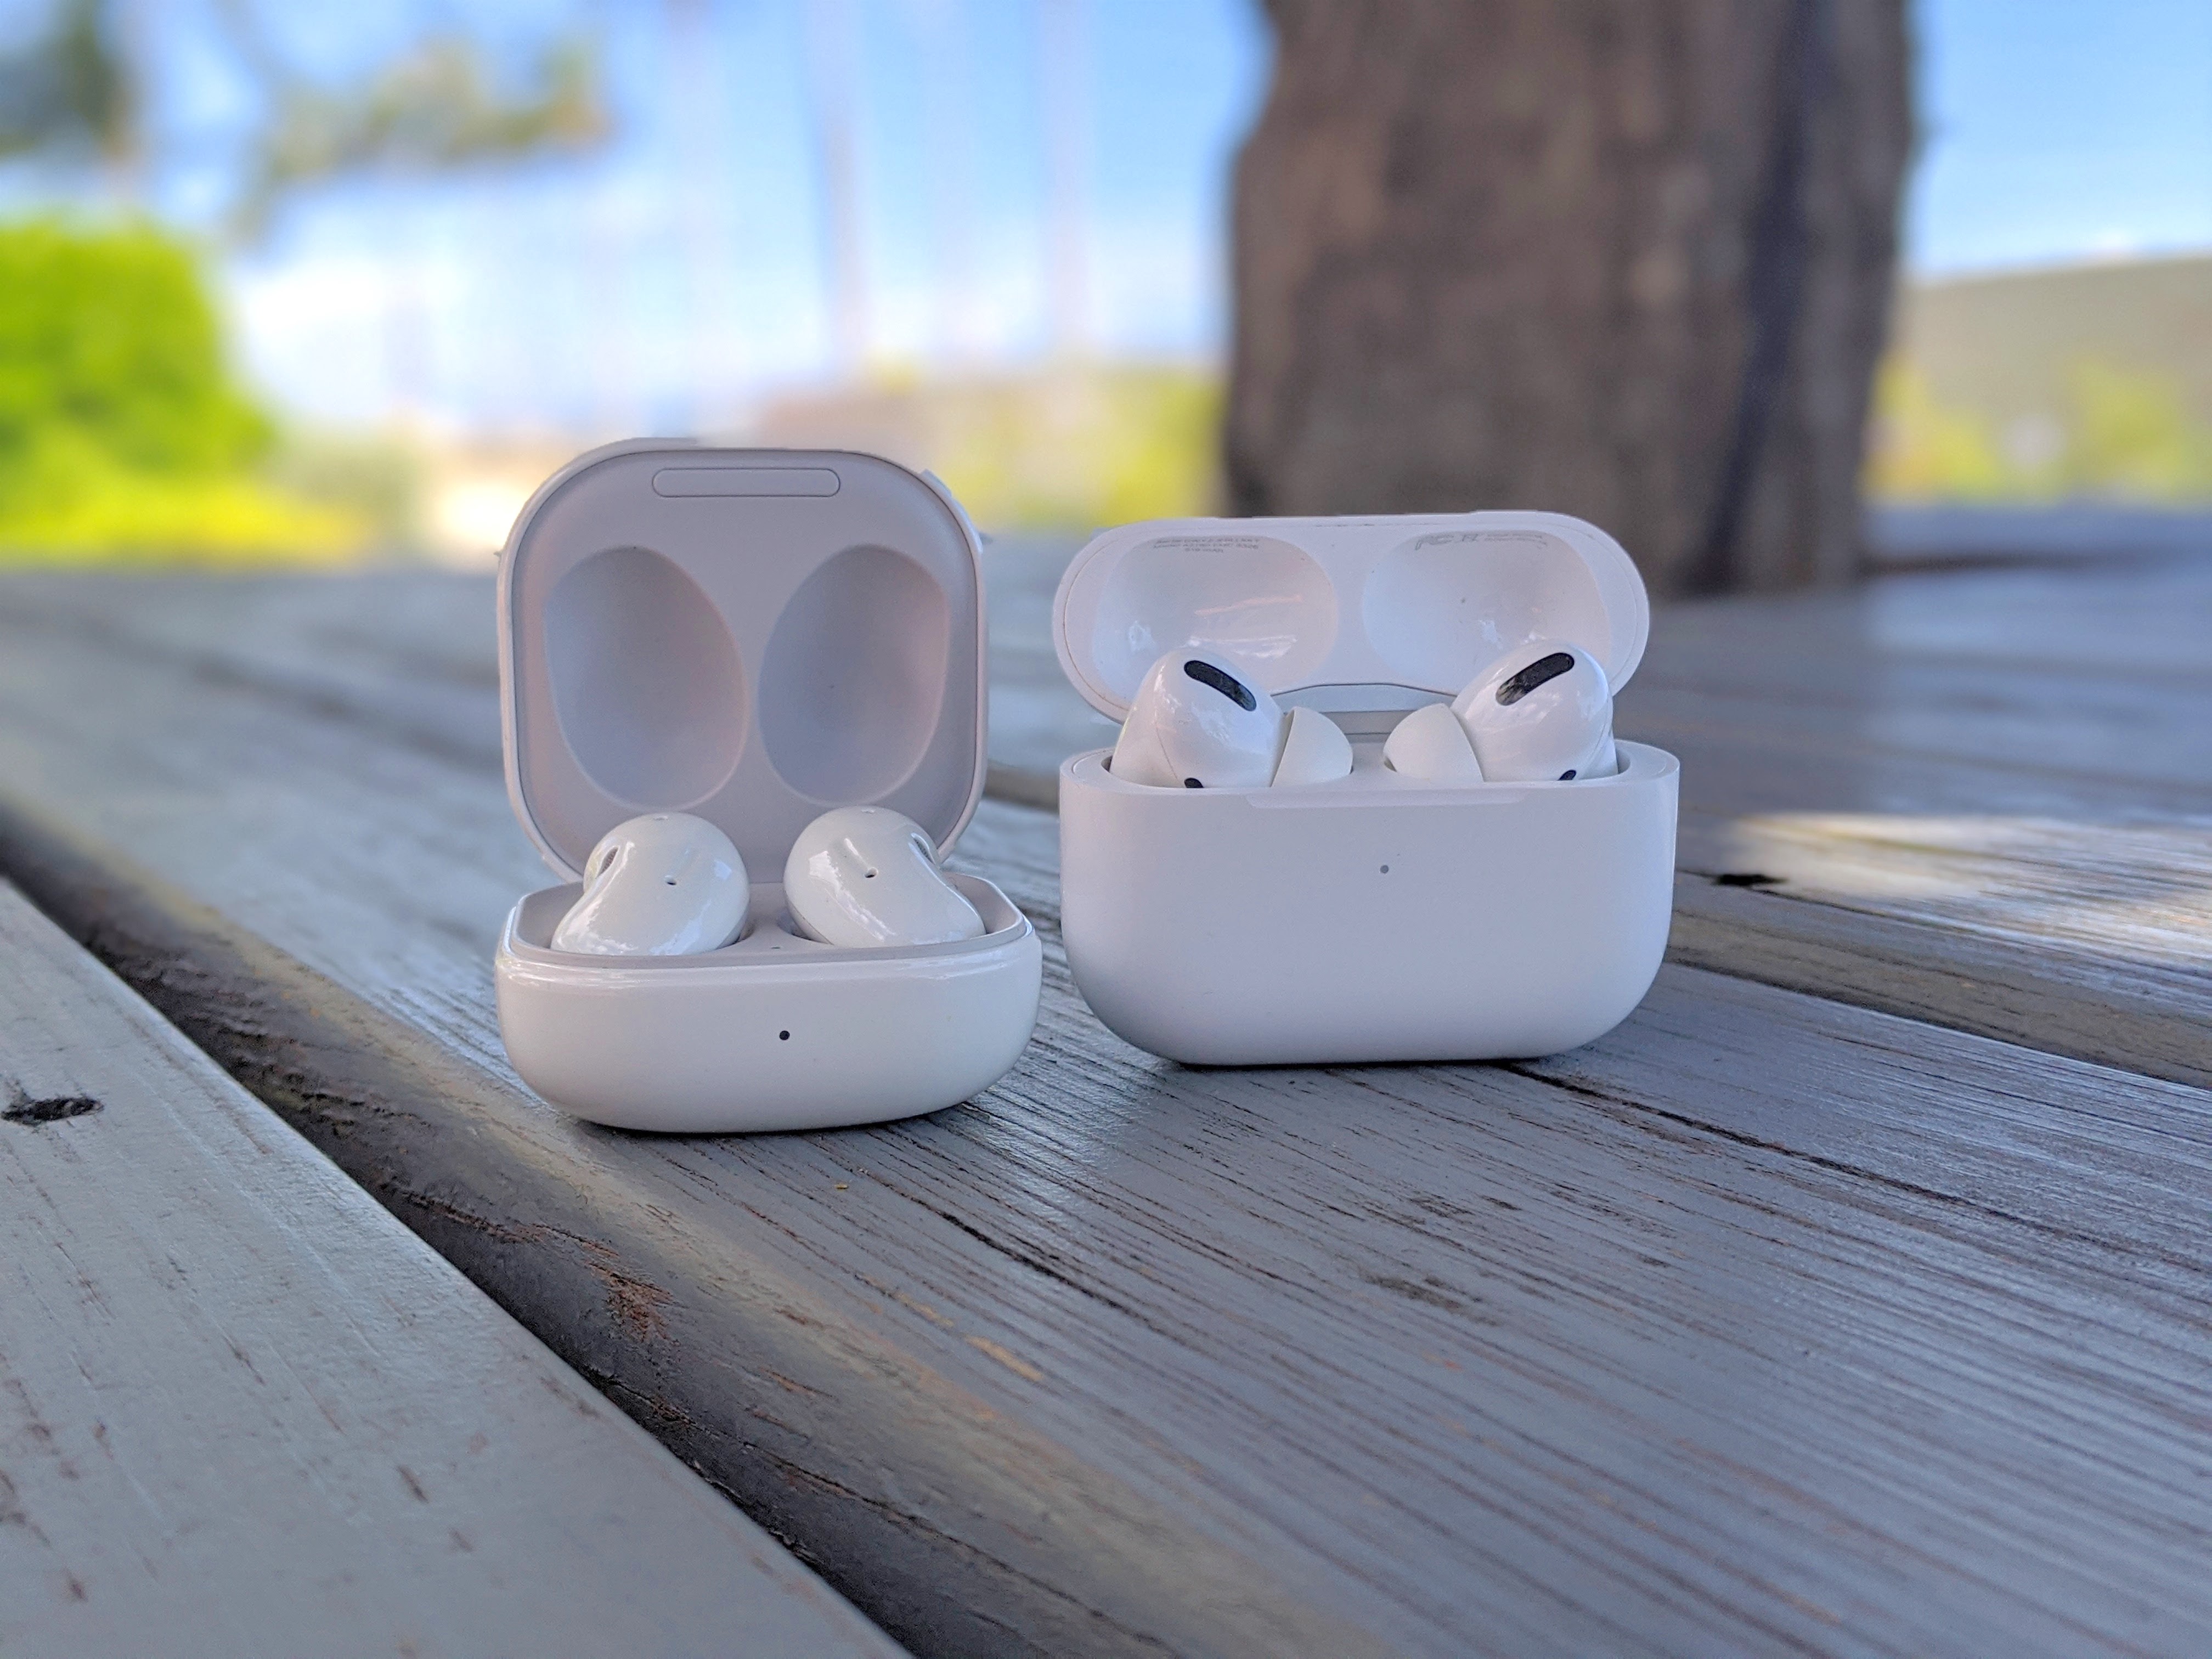 At interagere mærkelig Akvarium Apple AirPods Pro vs. Samsung Galaxy Buds Live: Which earbuds are best? |  Tom's Guide